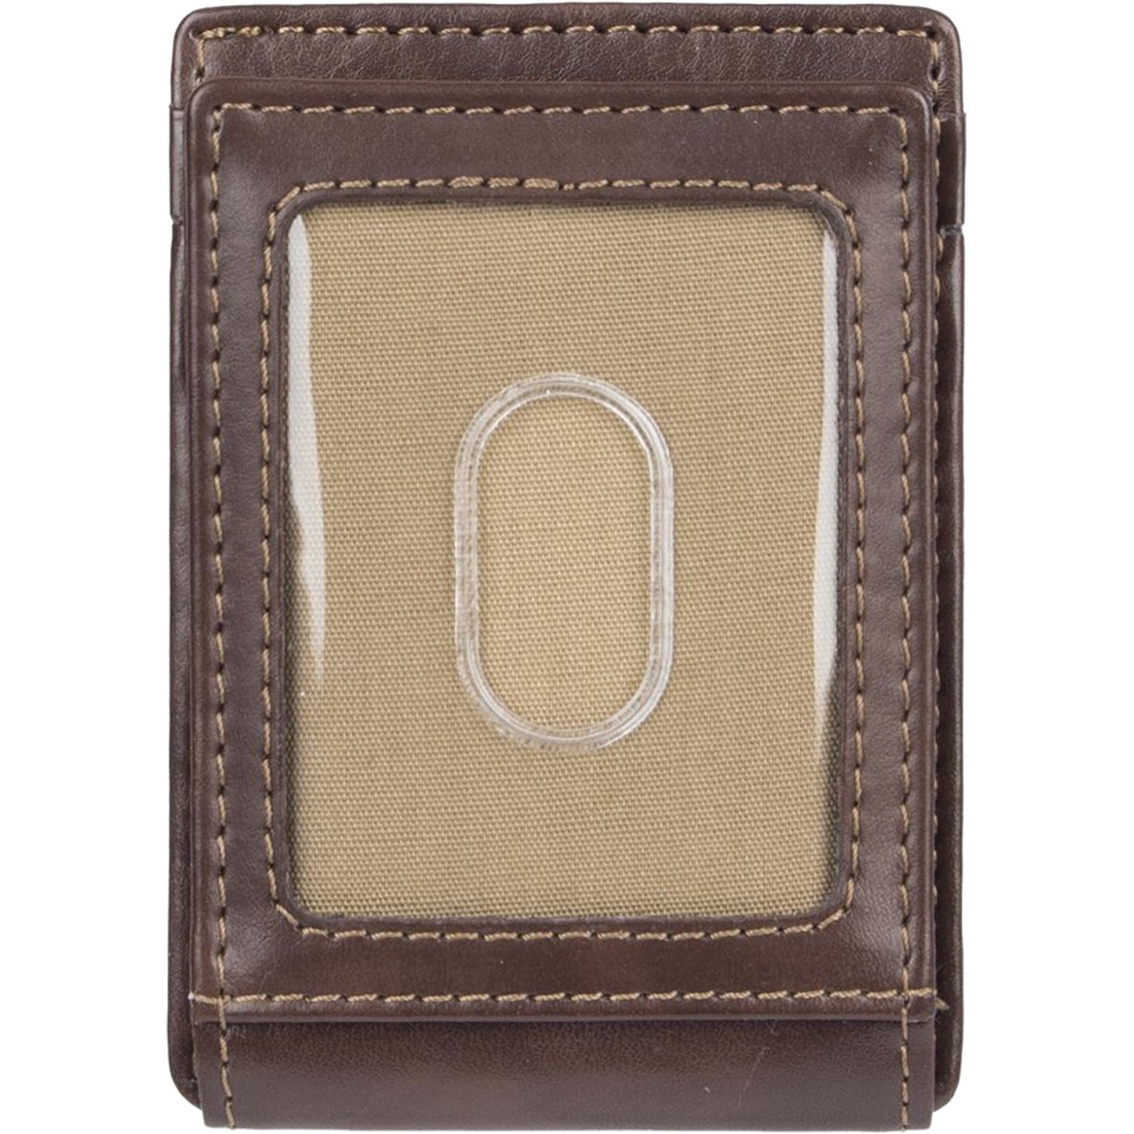 Dockers RFID Card Case Wallet with Magnetic Front Pocket - Image 2 of 3